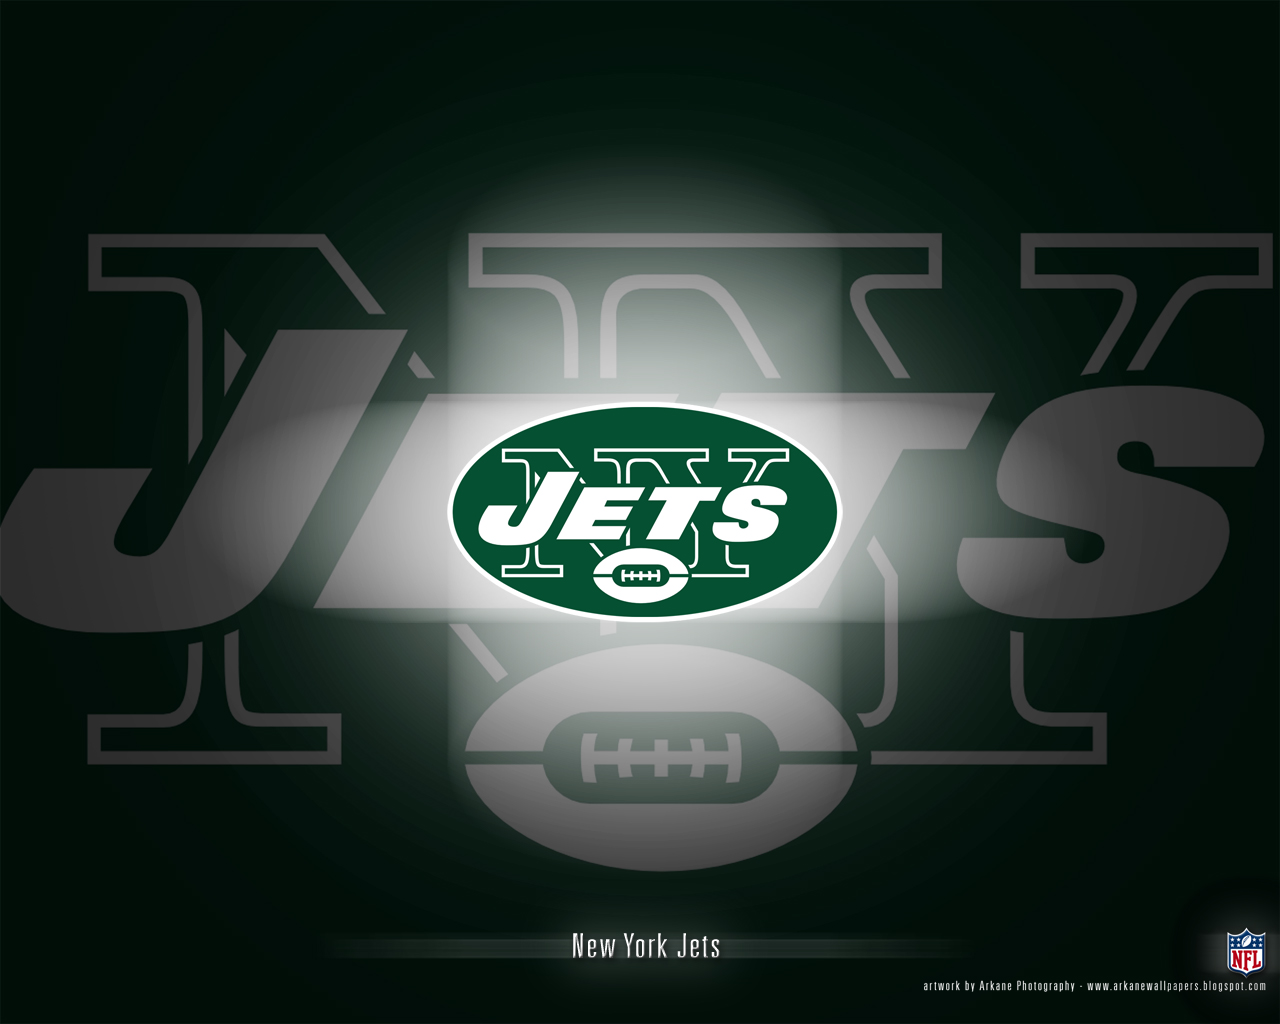 Today, we recommend you this great picture. Enjoy New York Jets wallpaper